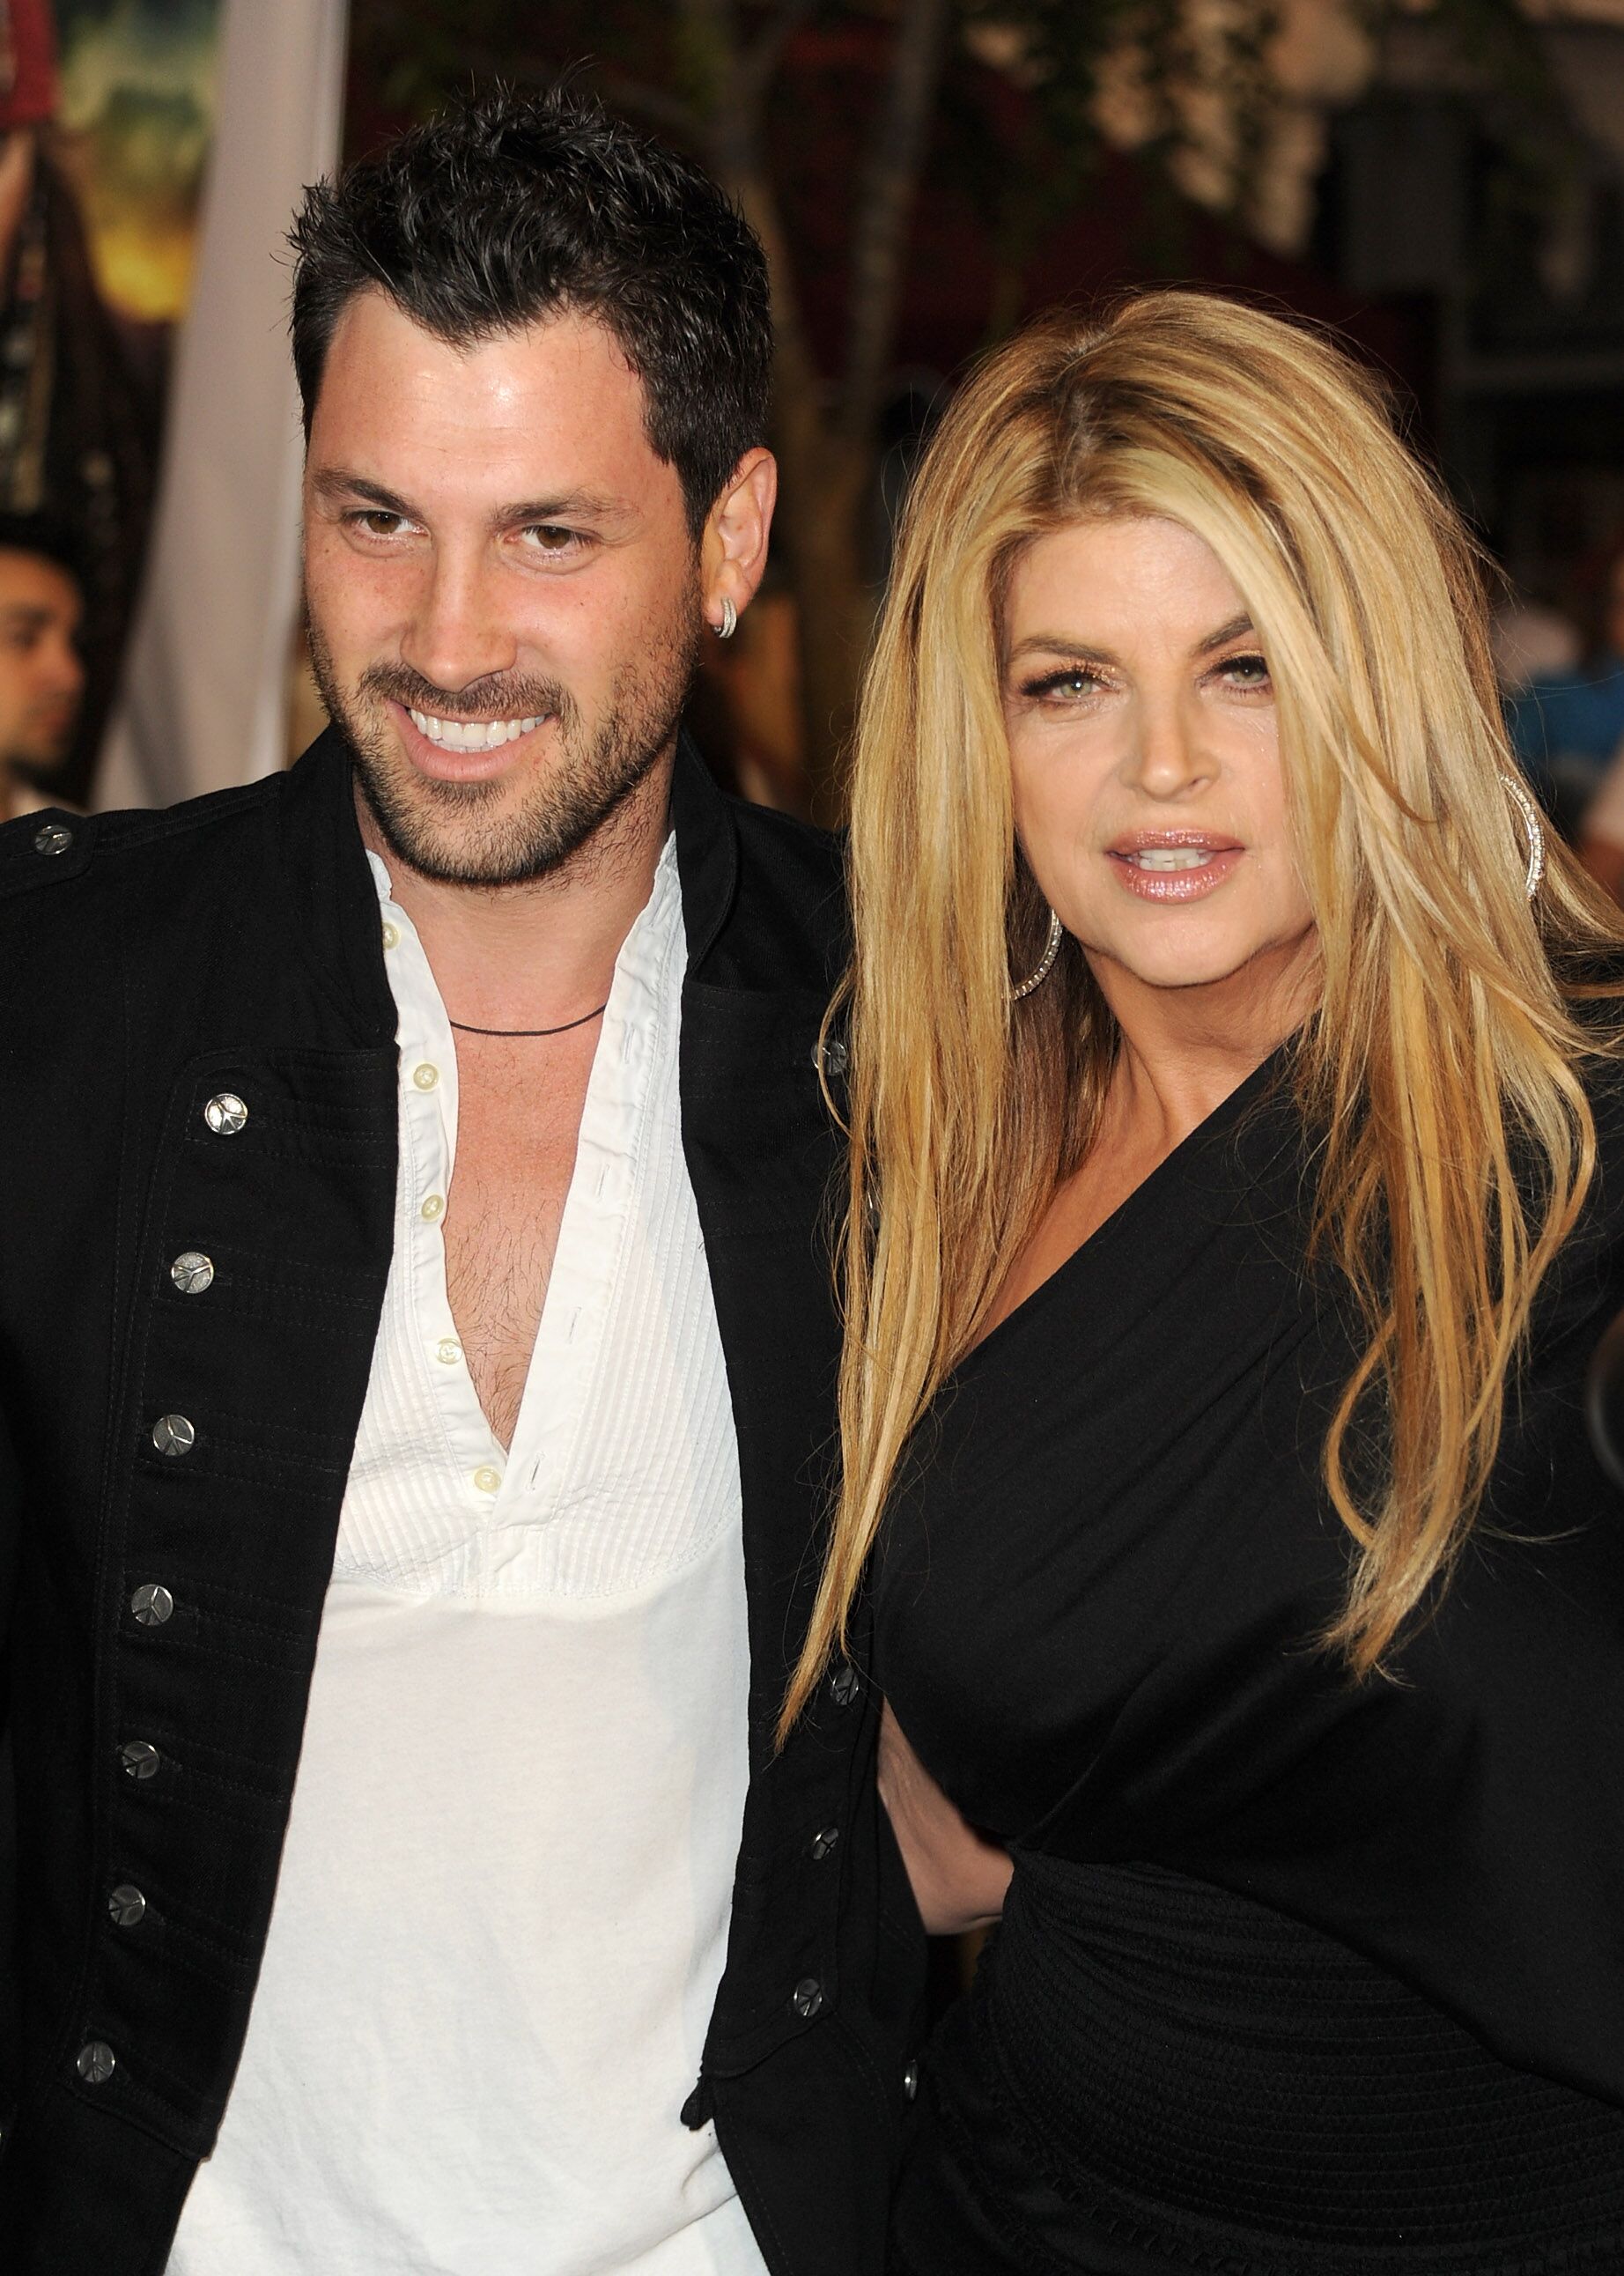  Maksim Chmerkovskiy and actress Kirstie Alley arrive at premiere of Walt Disney Pictures' "Pirates of the Caribbean: On Stranger Tides" held at Disneyland | Getty Images